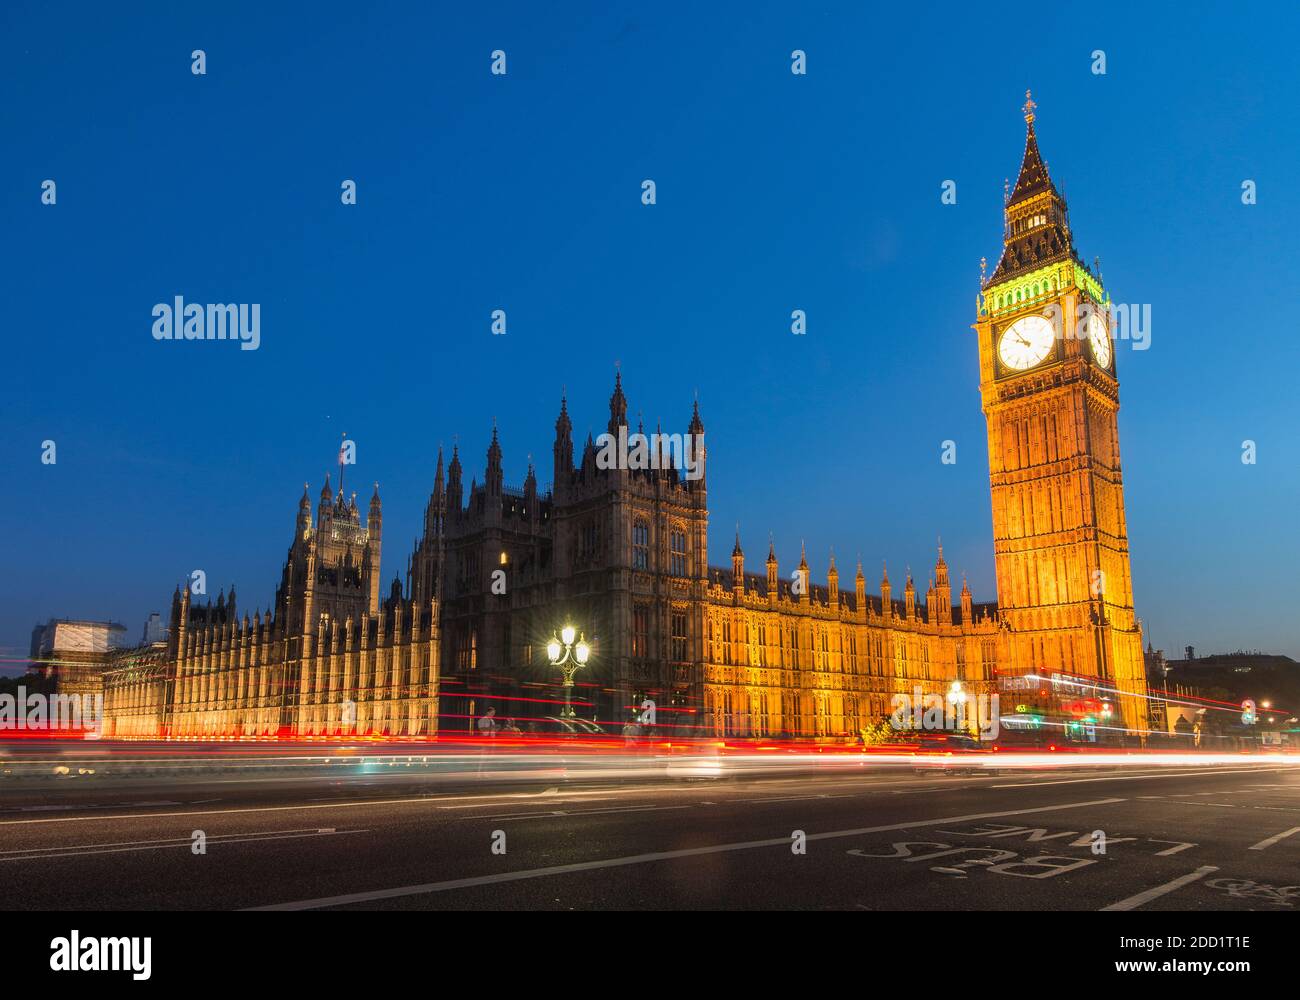 Twilight at Westminster Bridge, Big Ben and the Houses of Parliament in London, England. Stock Photo